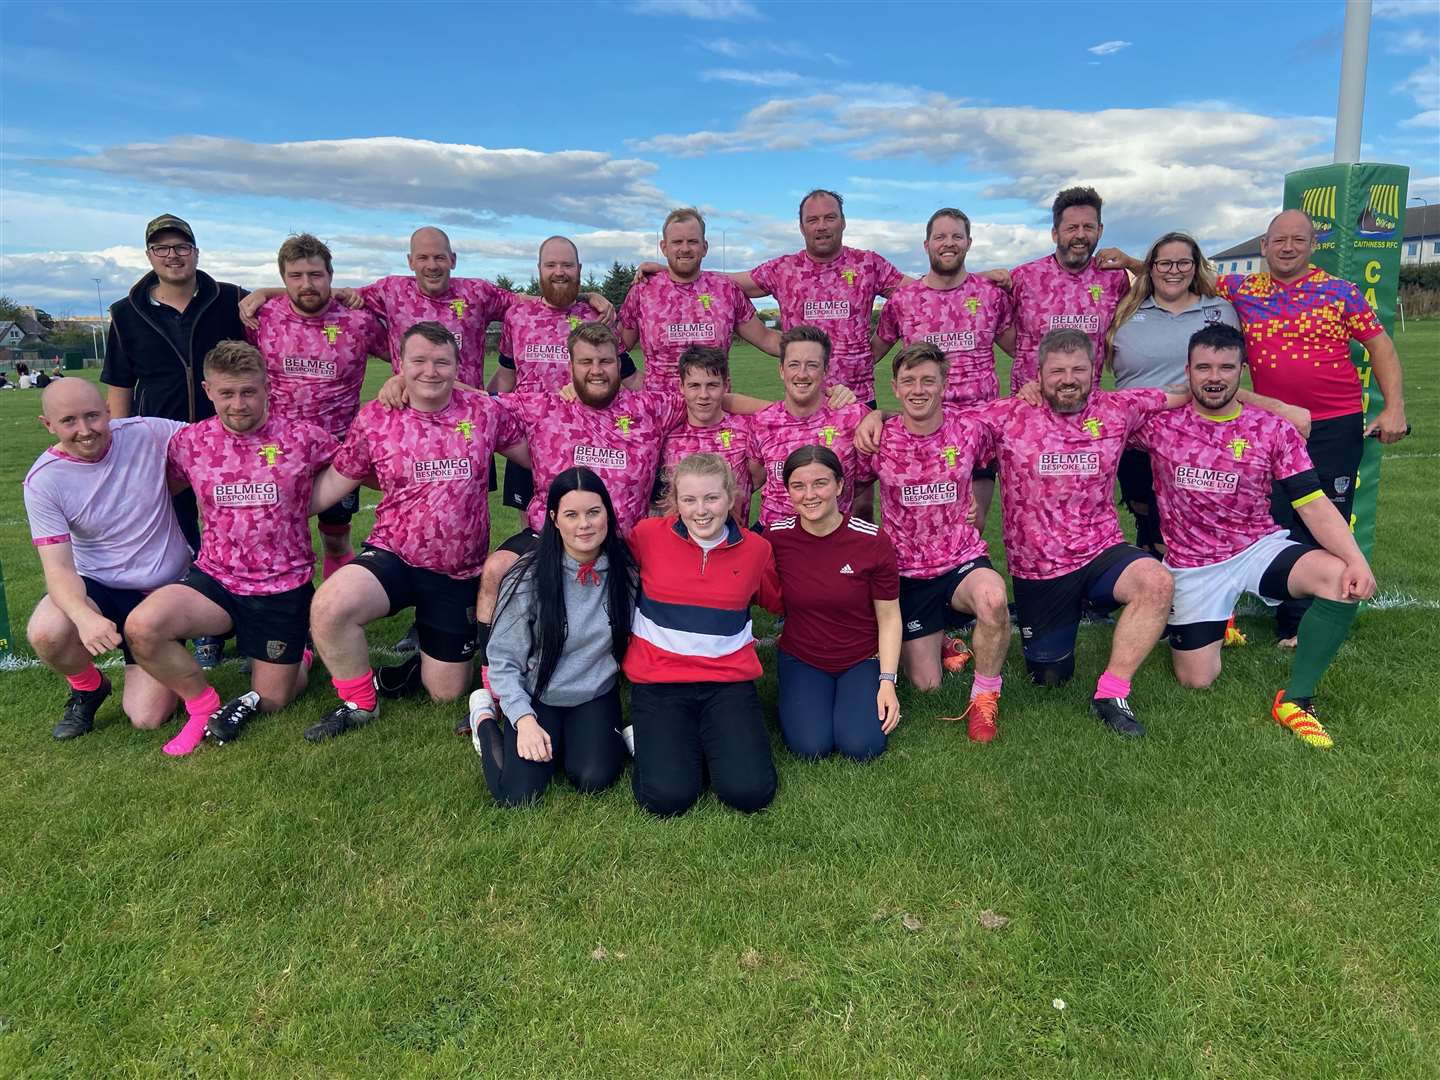 Turriff Rugby Club's latest games saw them just lose out in a closely contested match